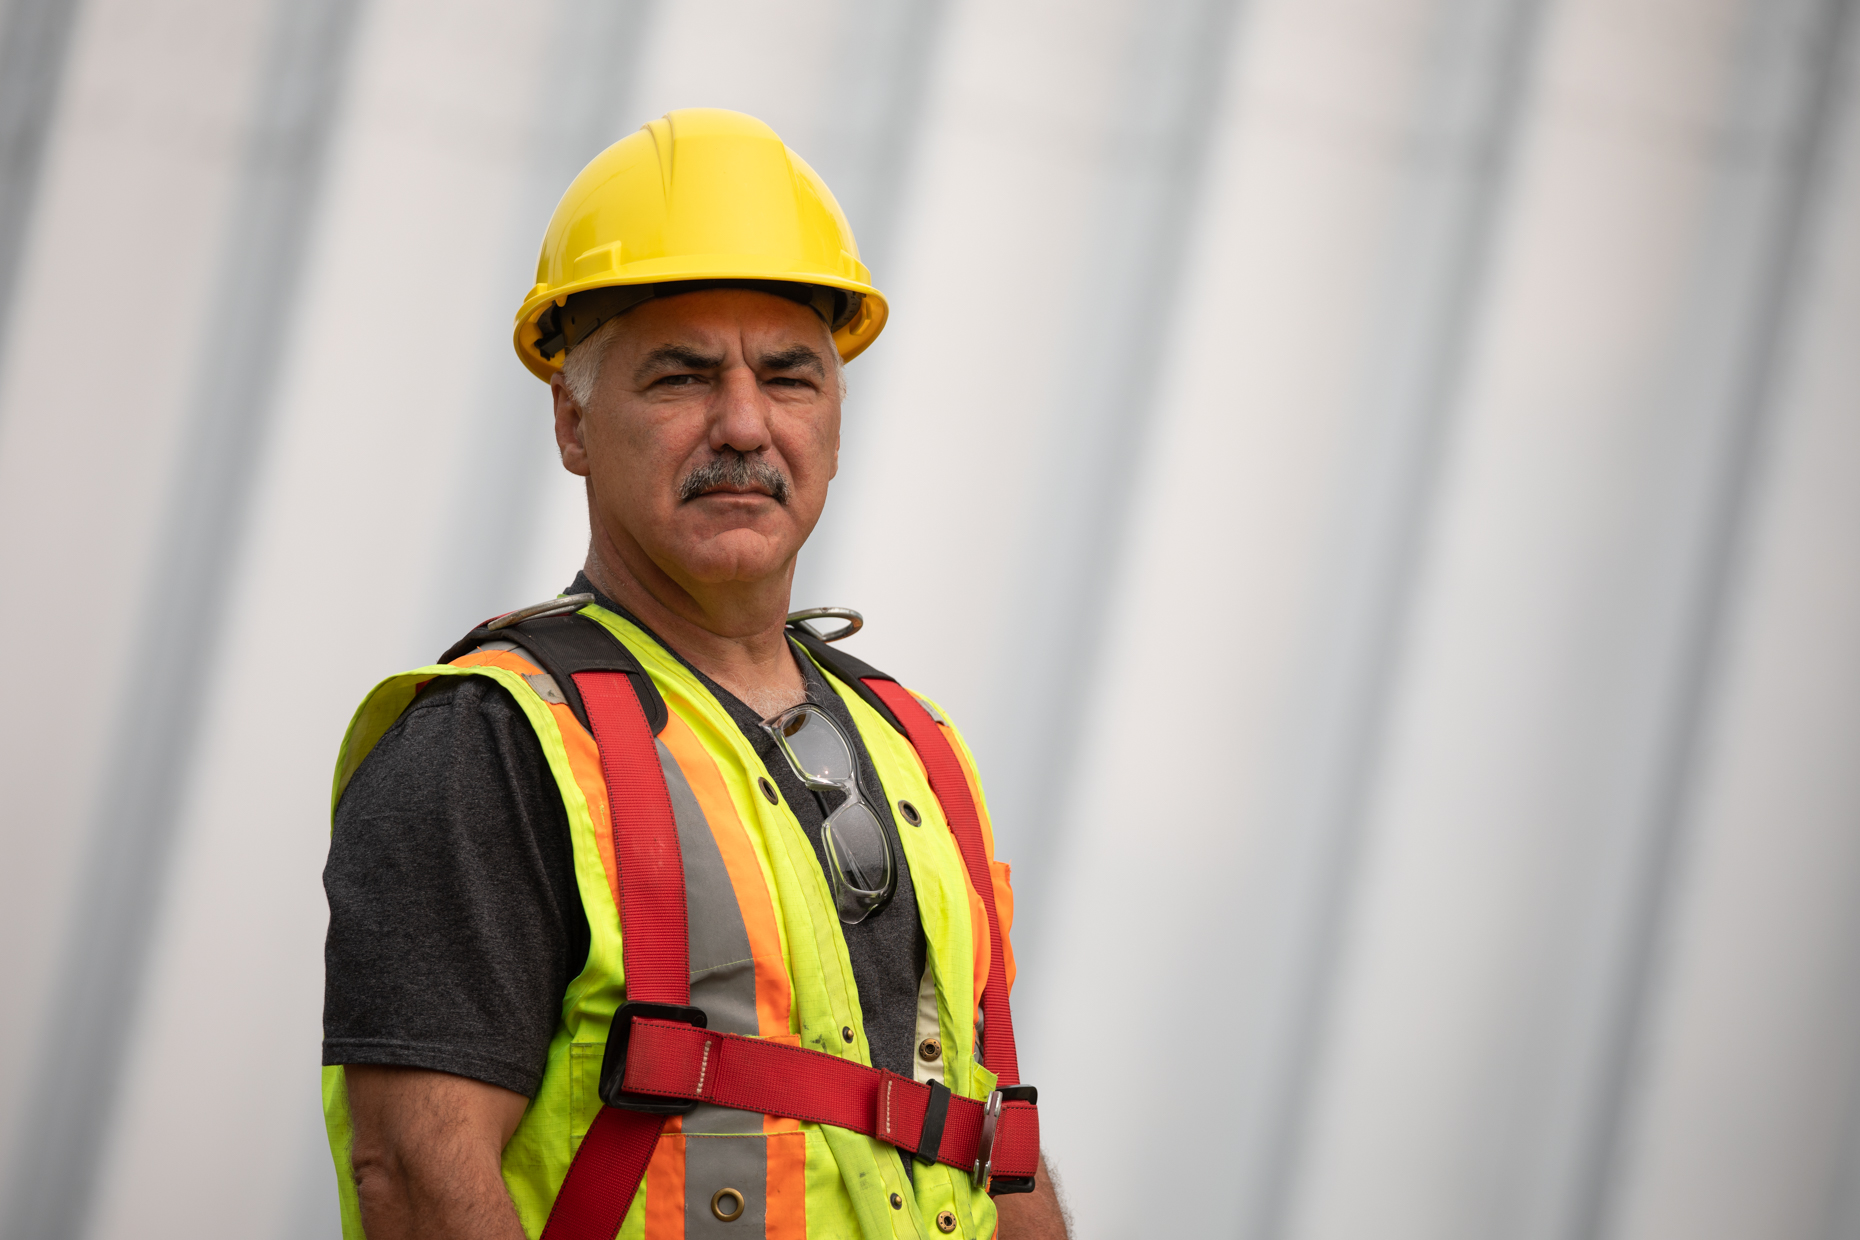 HUMAN_TRANSITION_RENEWABLE_ENERGY_CANADA_WORKER_JUST-11